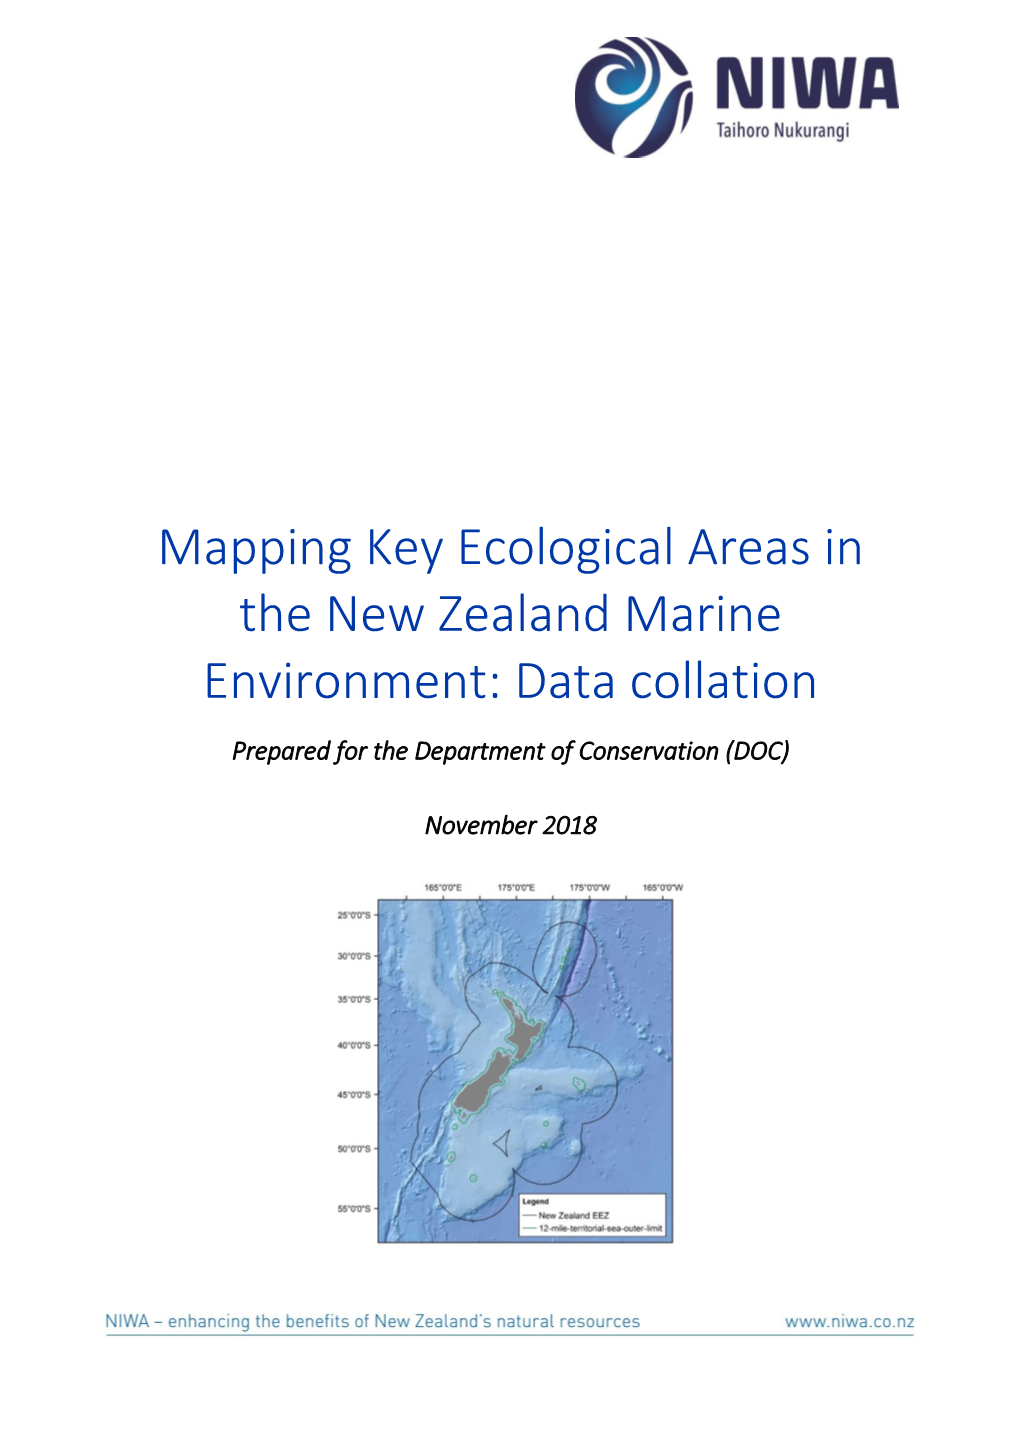 Mapping Key Ecological Areas in the New Zealand Marine Environment: Data Collation Prepared for the Department of Conservation (DOC)